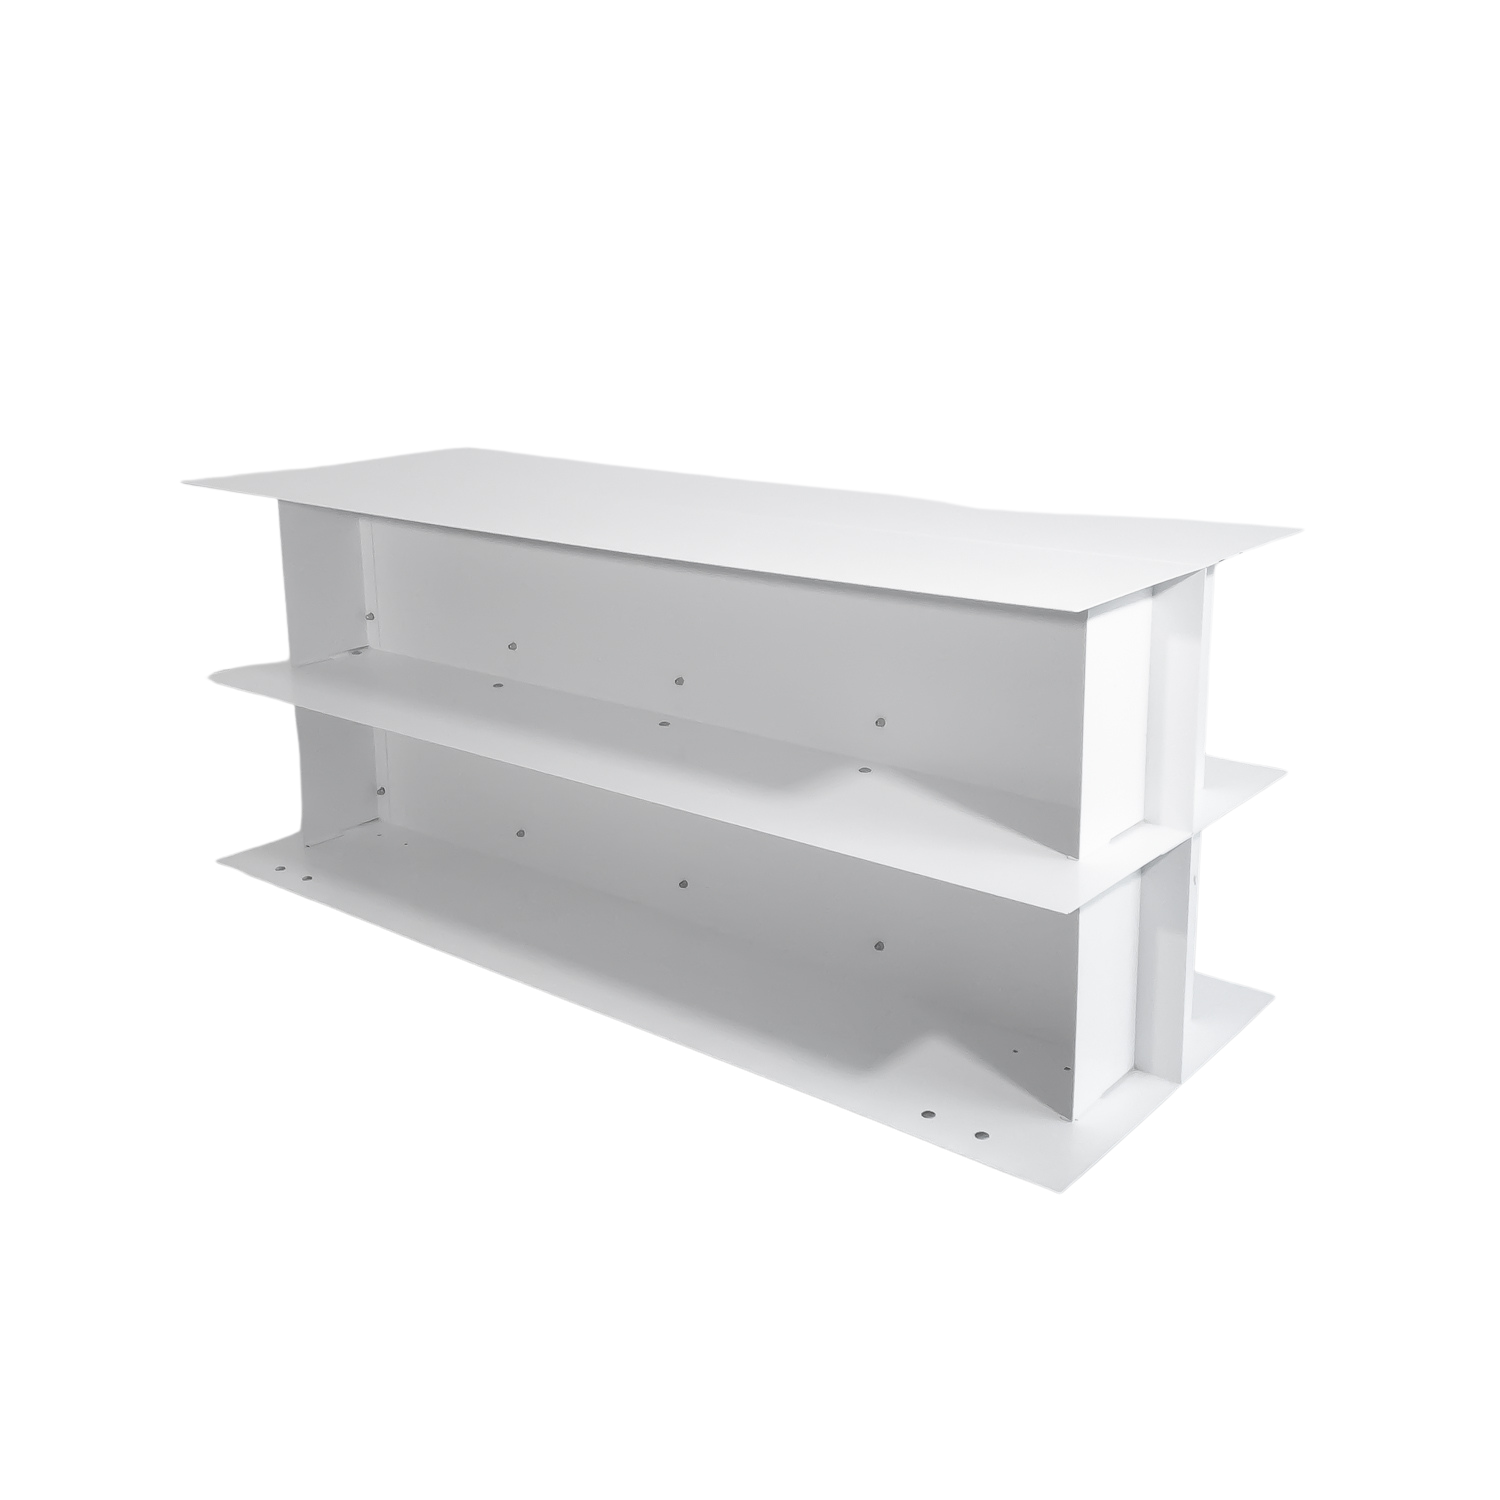 Design rectangular container table in white steel